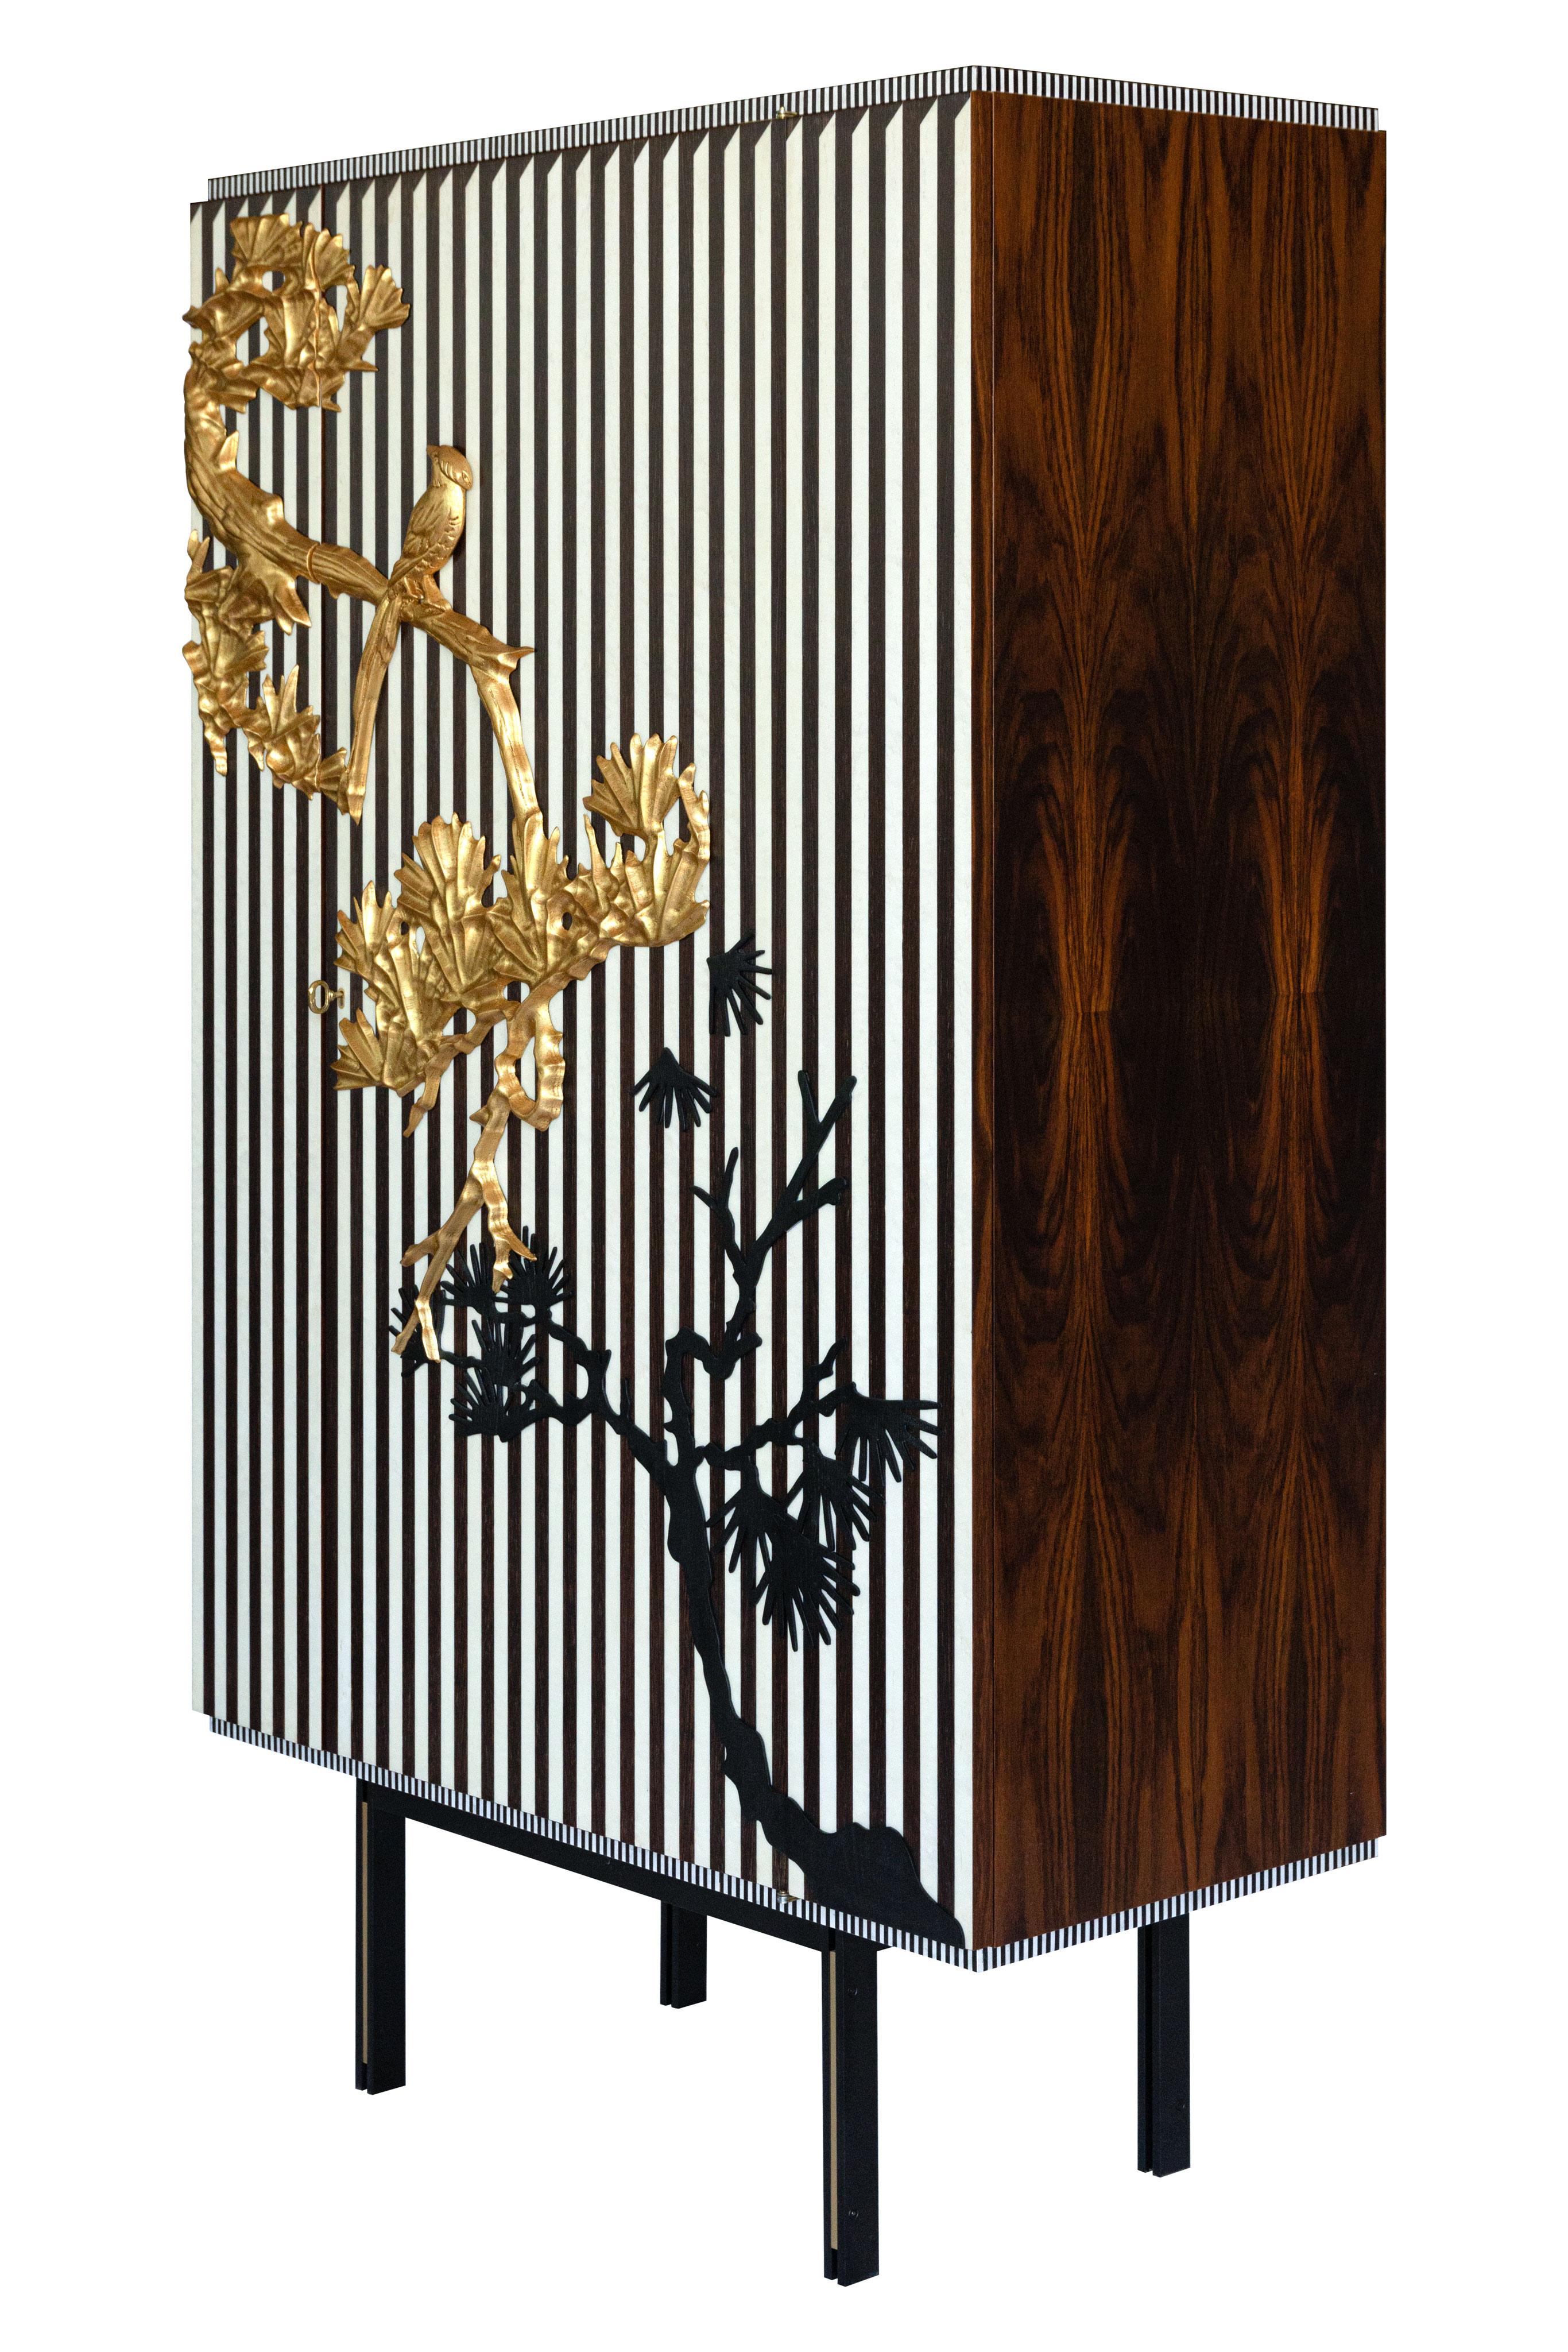 The contemporary theme of becoming, where change does not mean loss of identity but positive evolution, inspires the Bon Sai cabinet whose stylistic references are oriented towards the 20th century. The carved branch loses its leaves which, as they